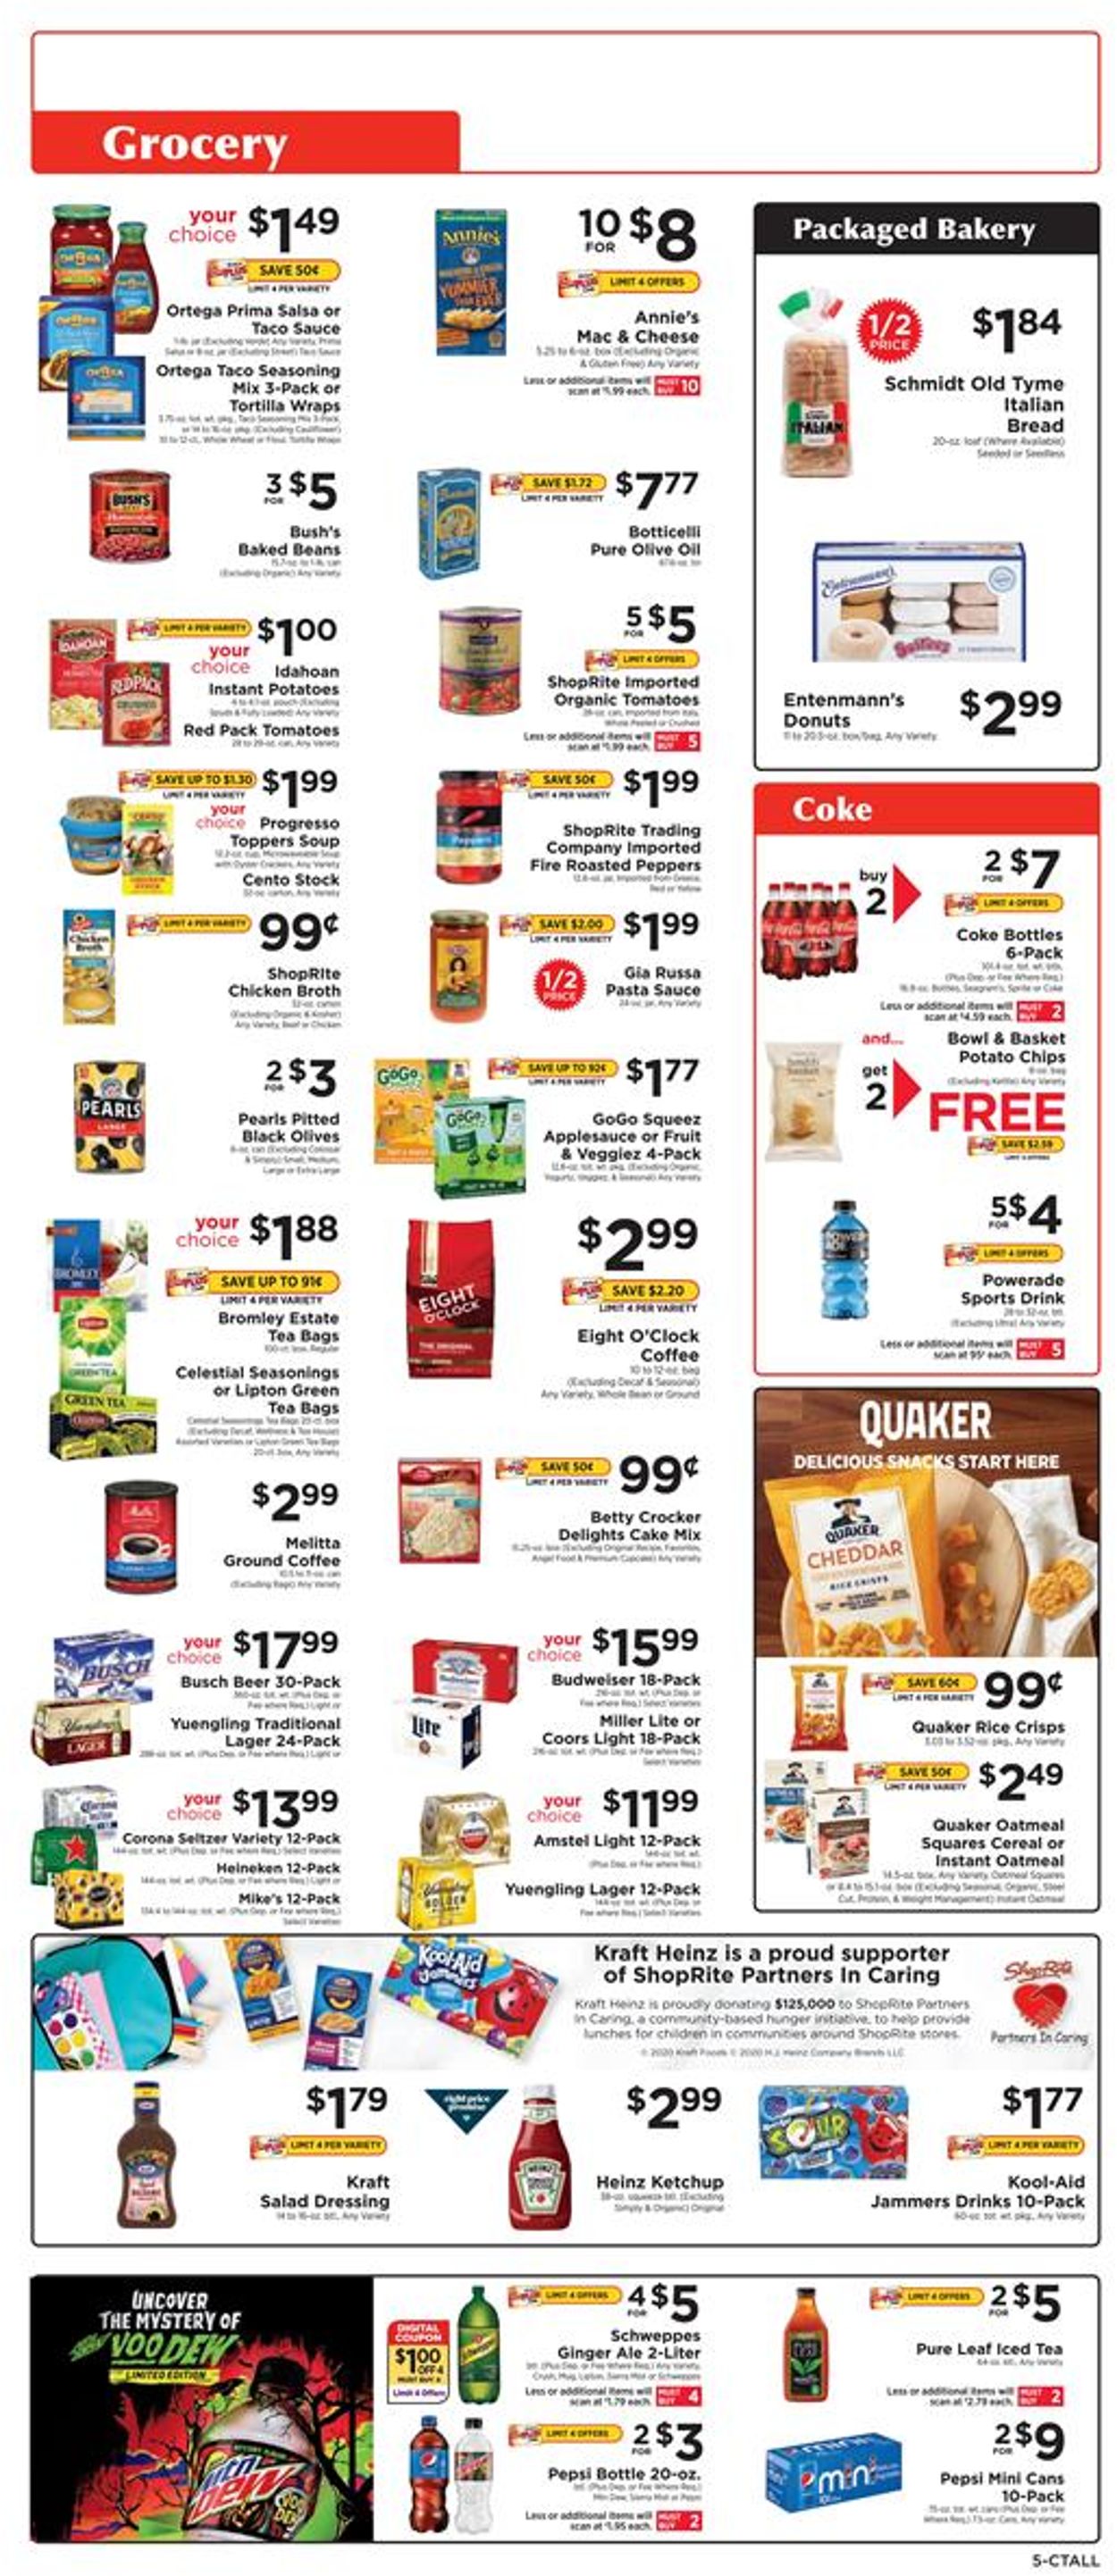 ShopRite Current weekly ad 10/11 - 10/17/2020 [5] - frequent-ads.com